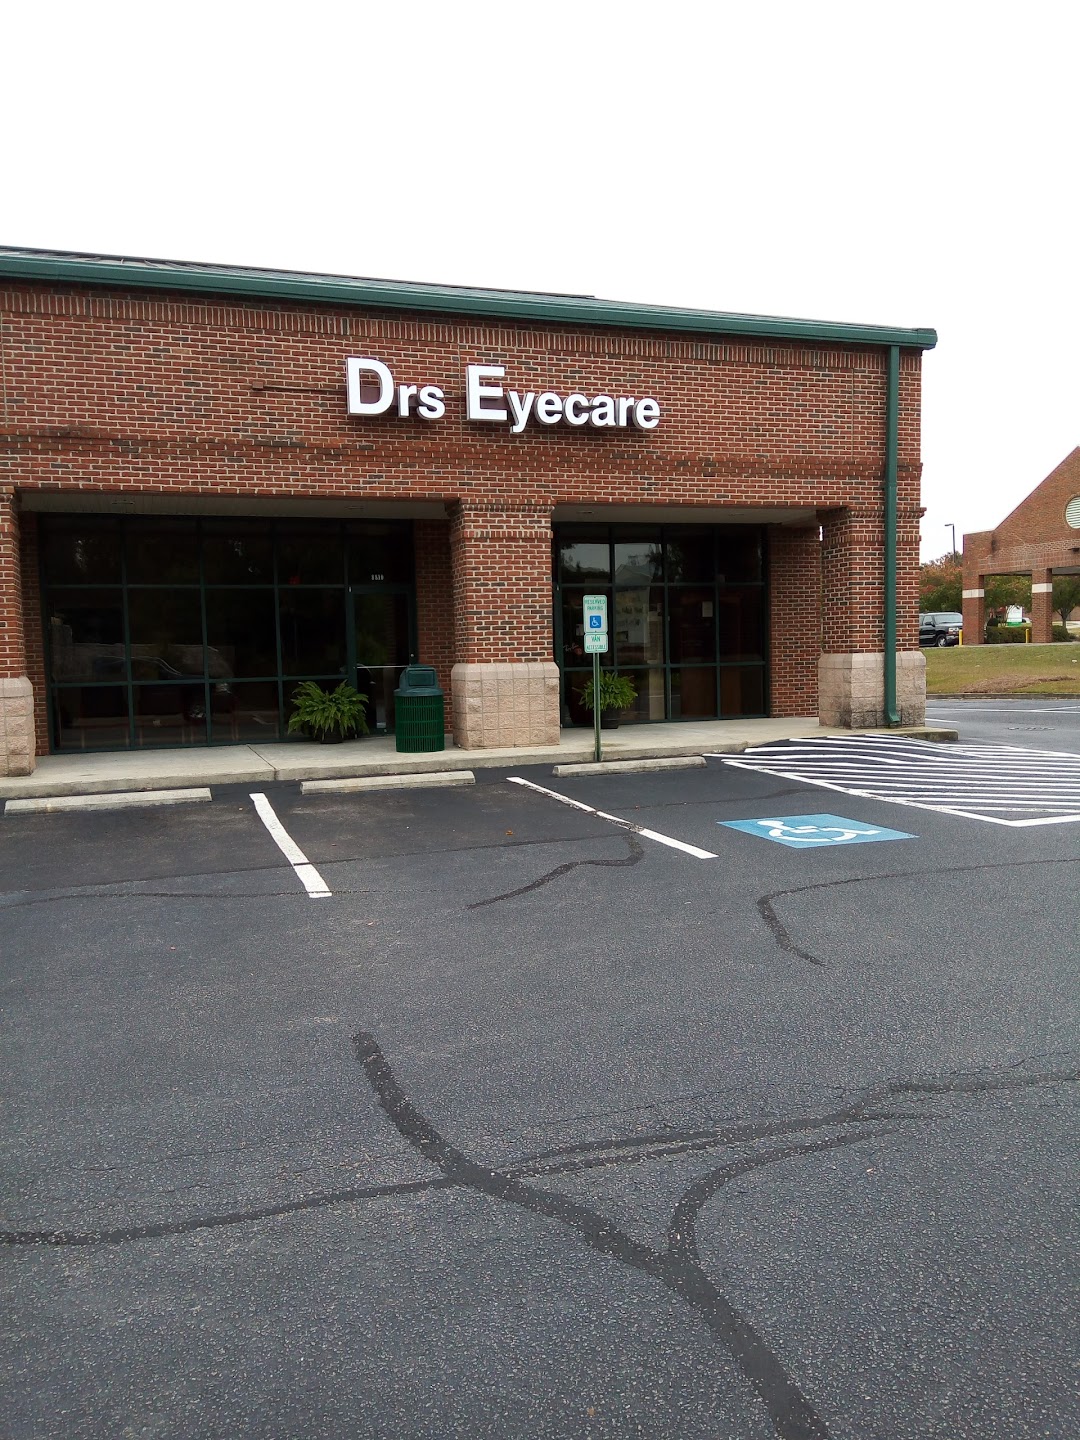 Drs Eyecare & Contact Lens Cannon Kathy P OD